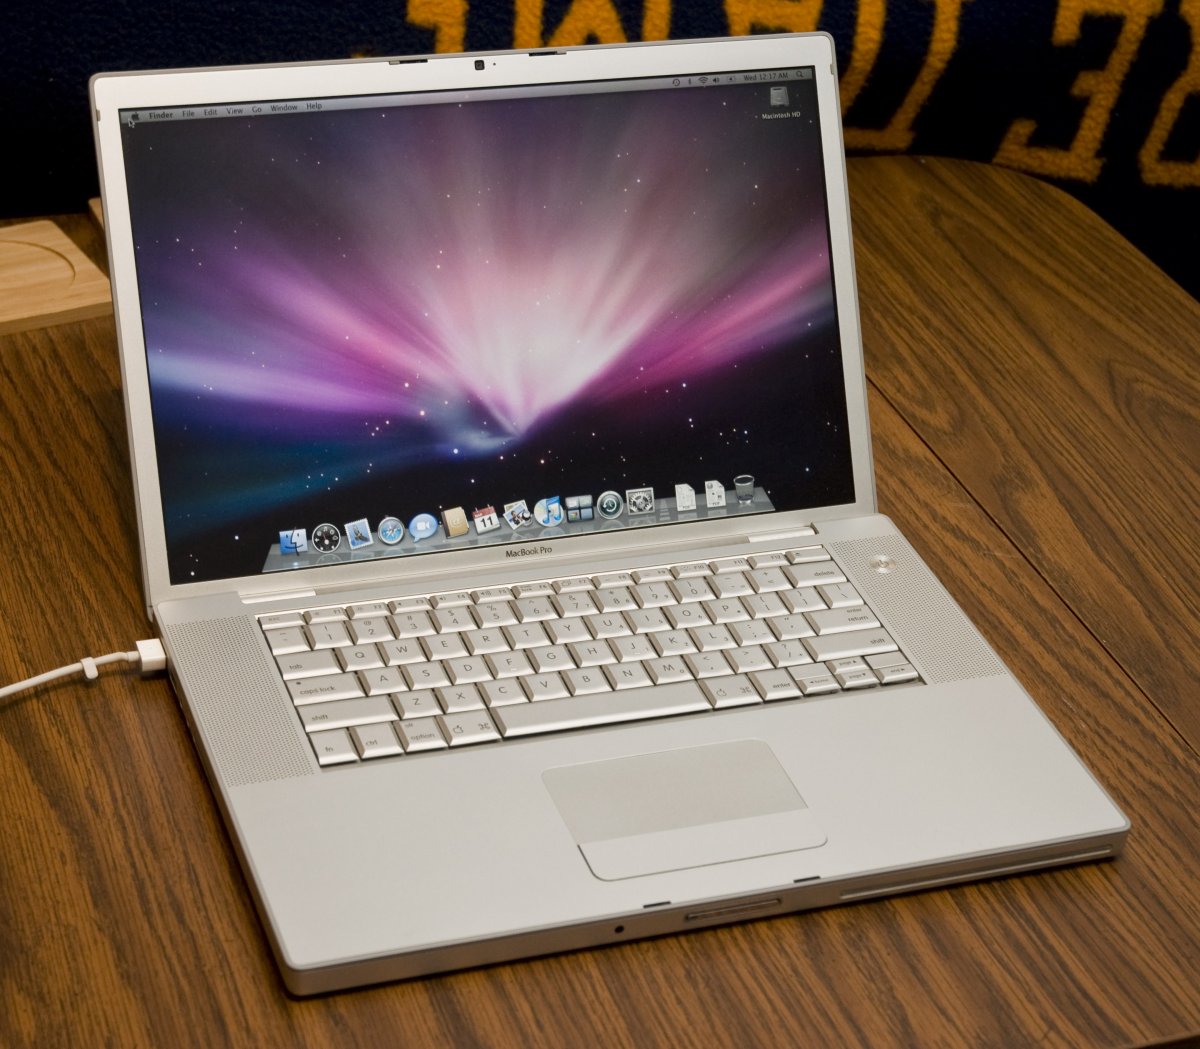 the-first-macbook-pro-came-out-in-2006-now-the-macbook-pro-is-apples-flagship-laptop.jpg